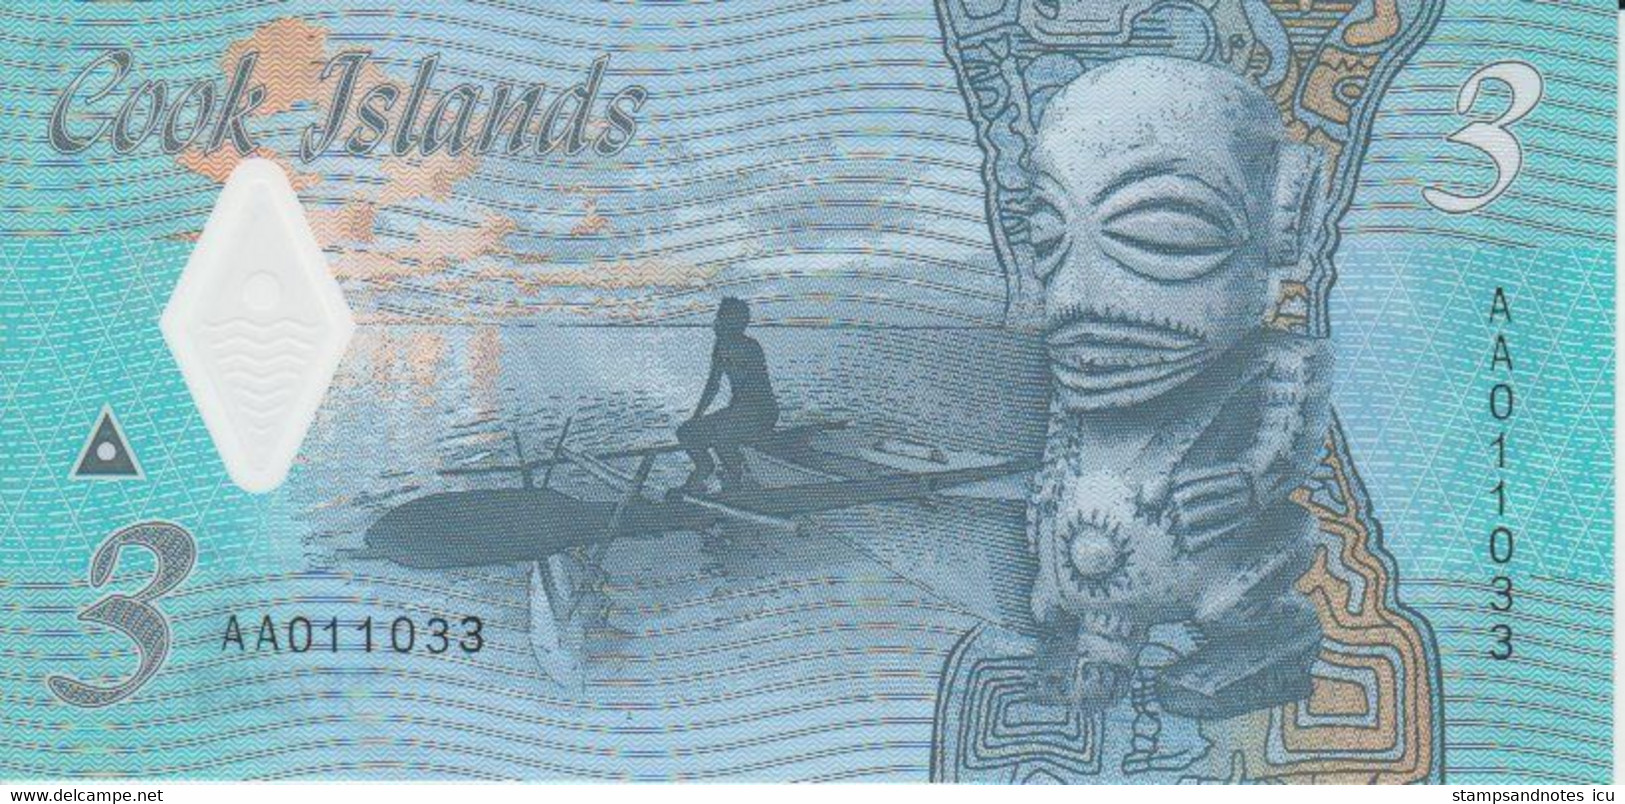 Cook Islands 3 Dollars ND ( 2021 ) P New 11 UNC Polymer Nice Number 011033 - Cook Islands